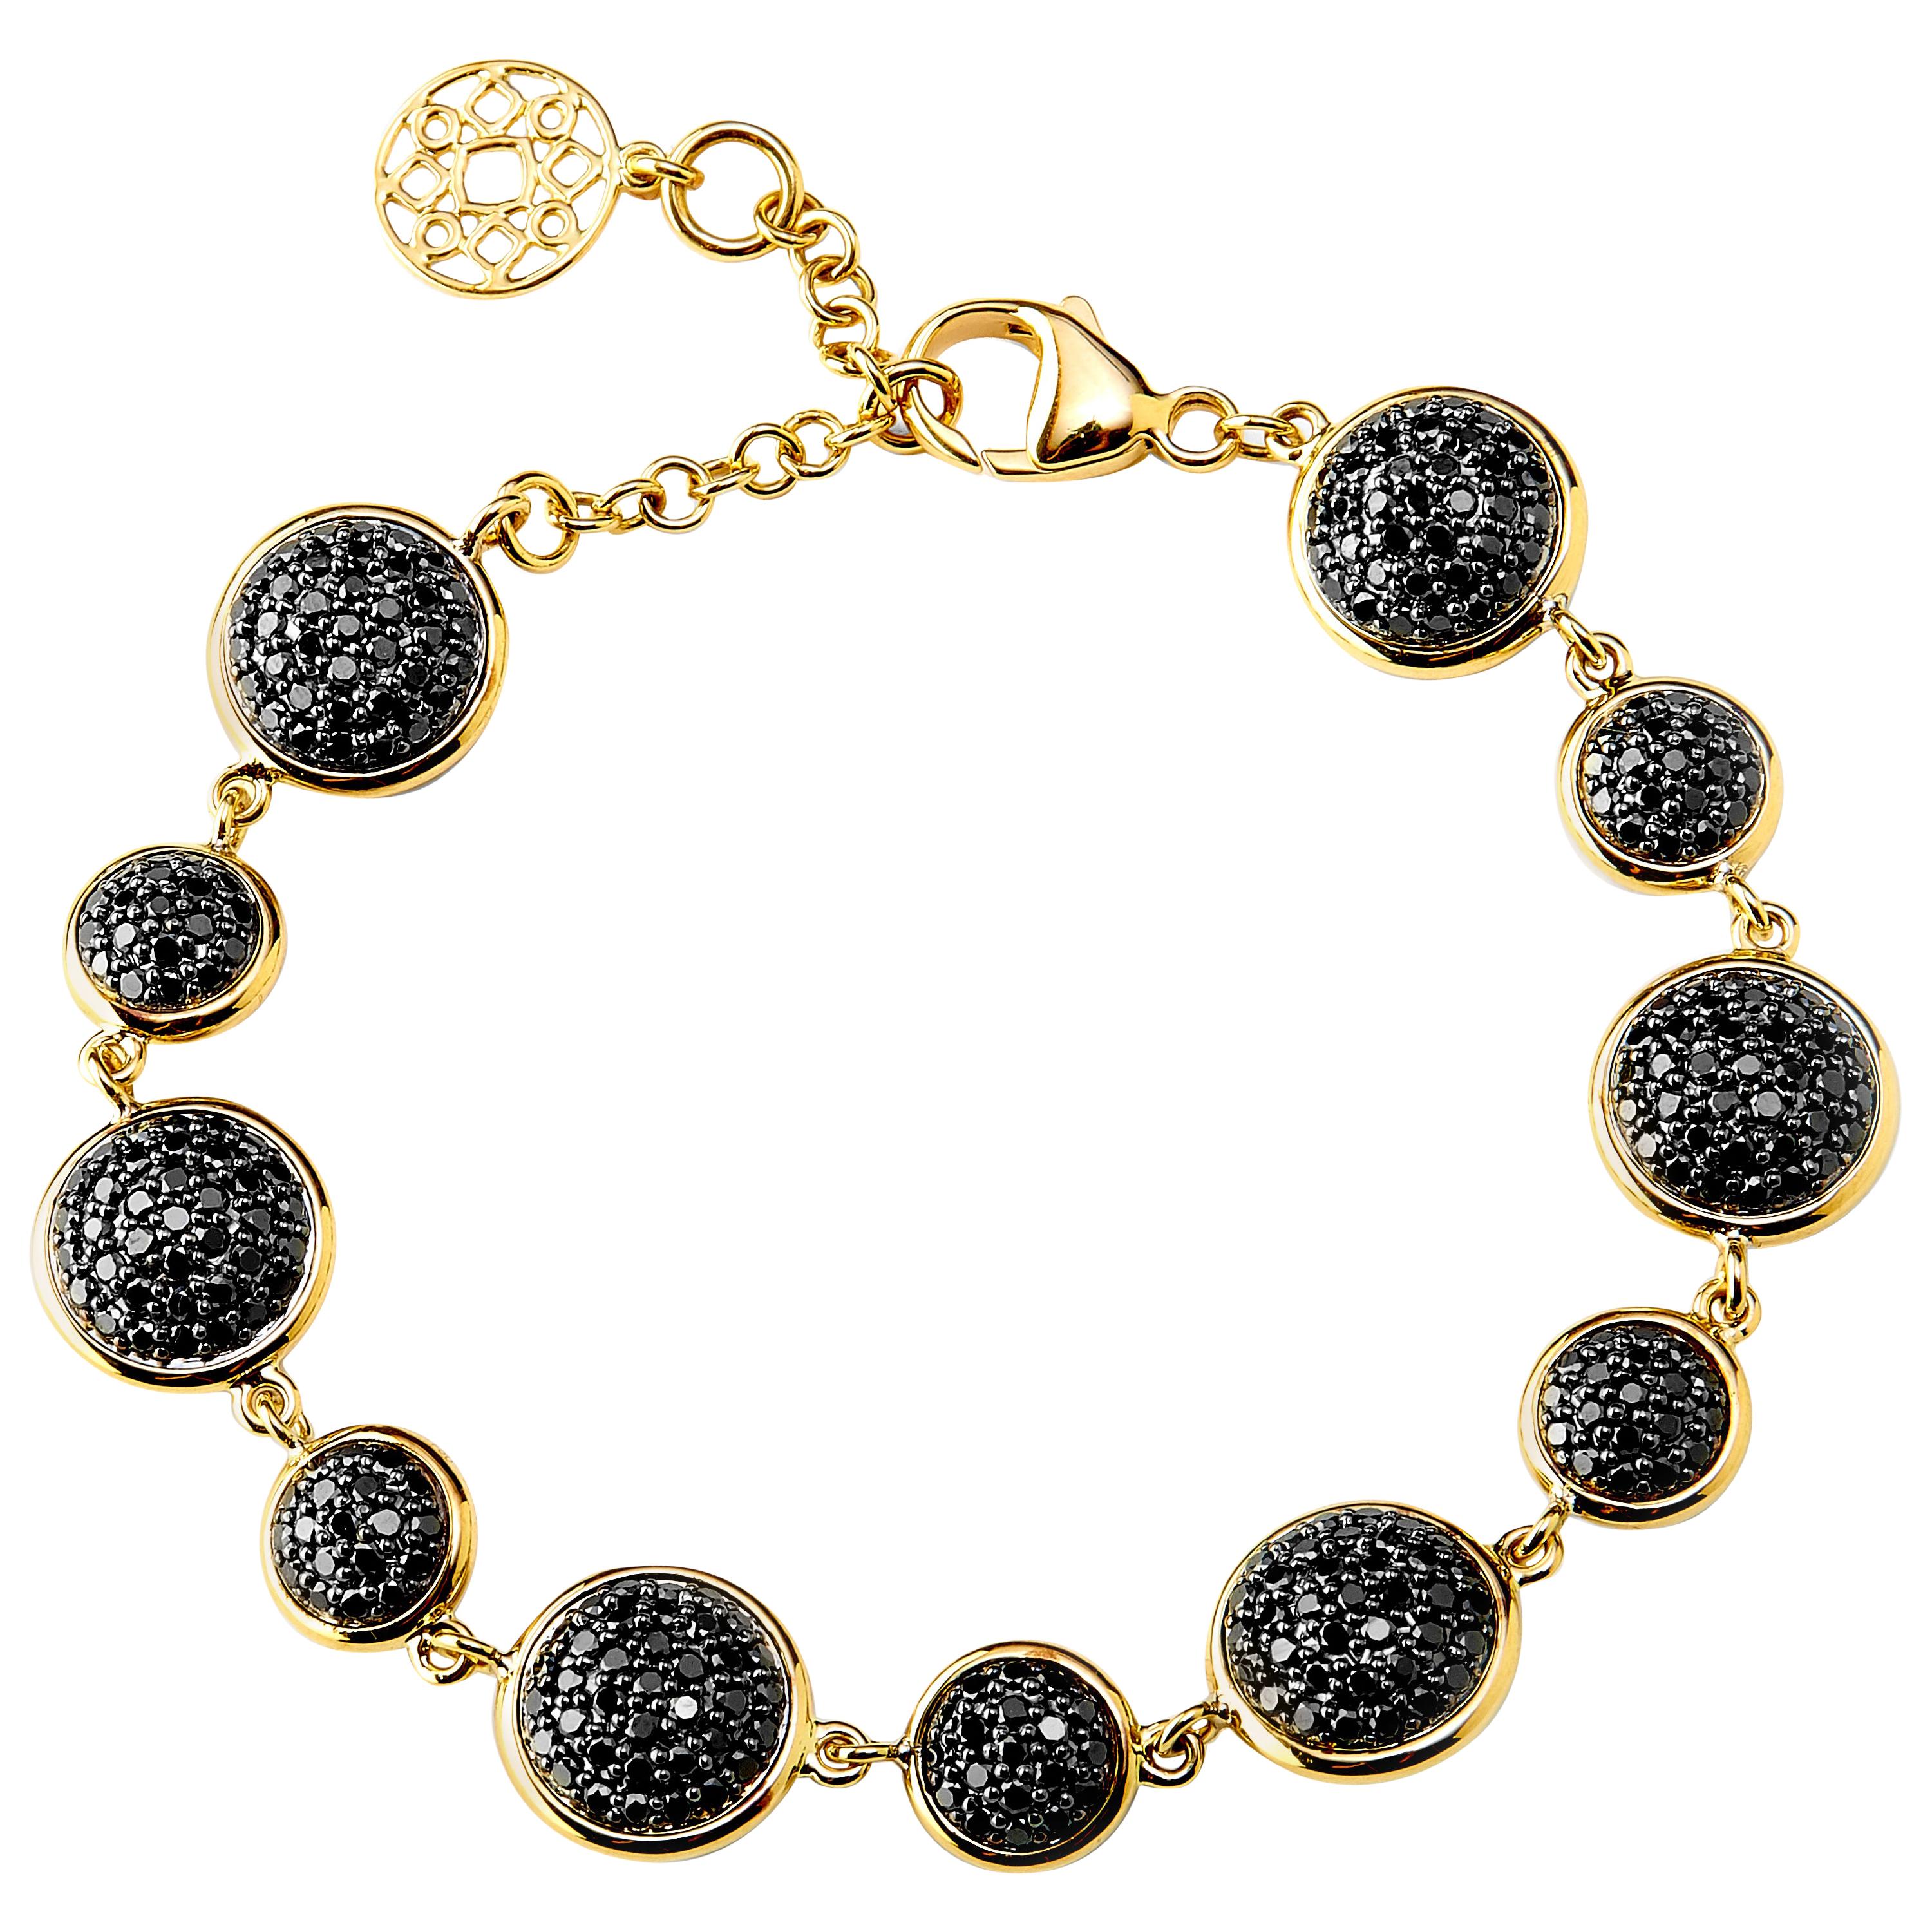 Syna Yellow Gold Reversible Bracelet with Black and Diamonds